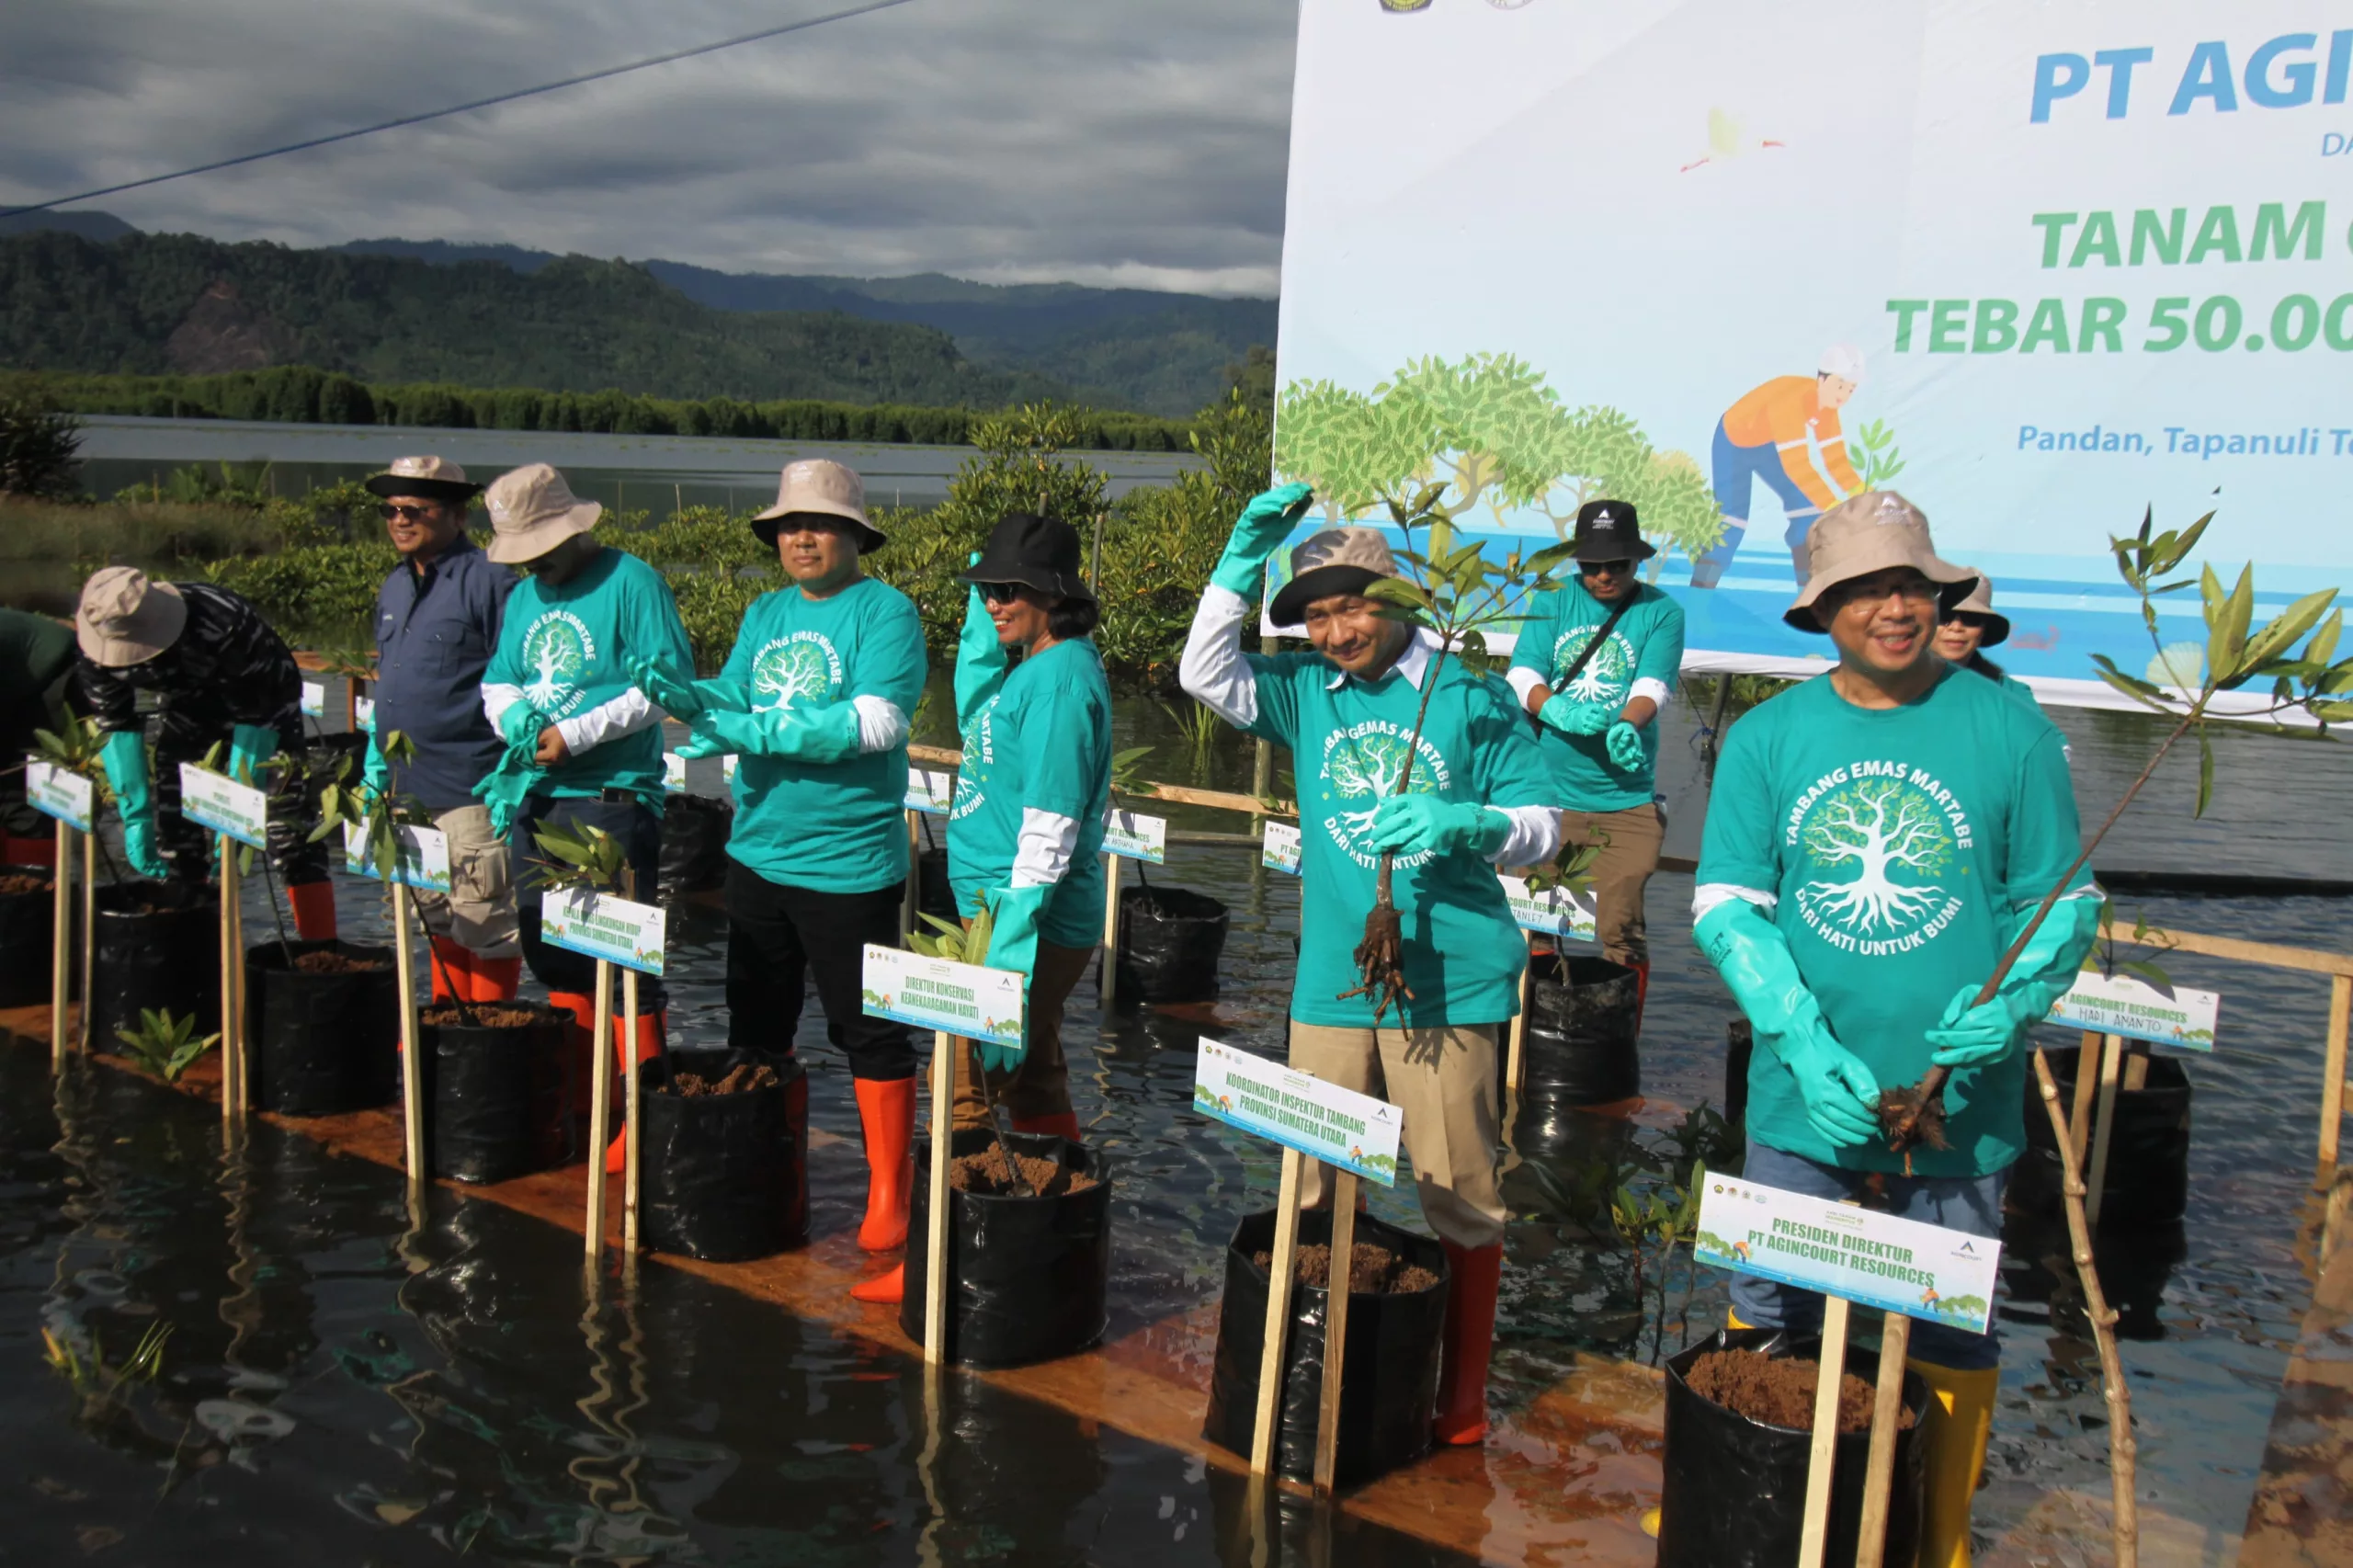 Photo 1: President Director of PT Agincourt Resources, Muliady Sutio, (right) and Coordinator of Mine Inspectors of North Sumatra Province, Suroyo, (second from right) symbolically planted mangroves in the Mangrove Planting Action of 60,000 mangrove seedlings in Pandan, Central Tapanuli, Monday (3/6/2024). (Doc: PTAR)